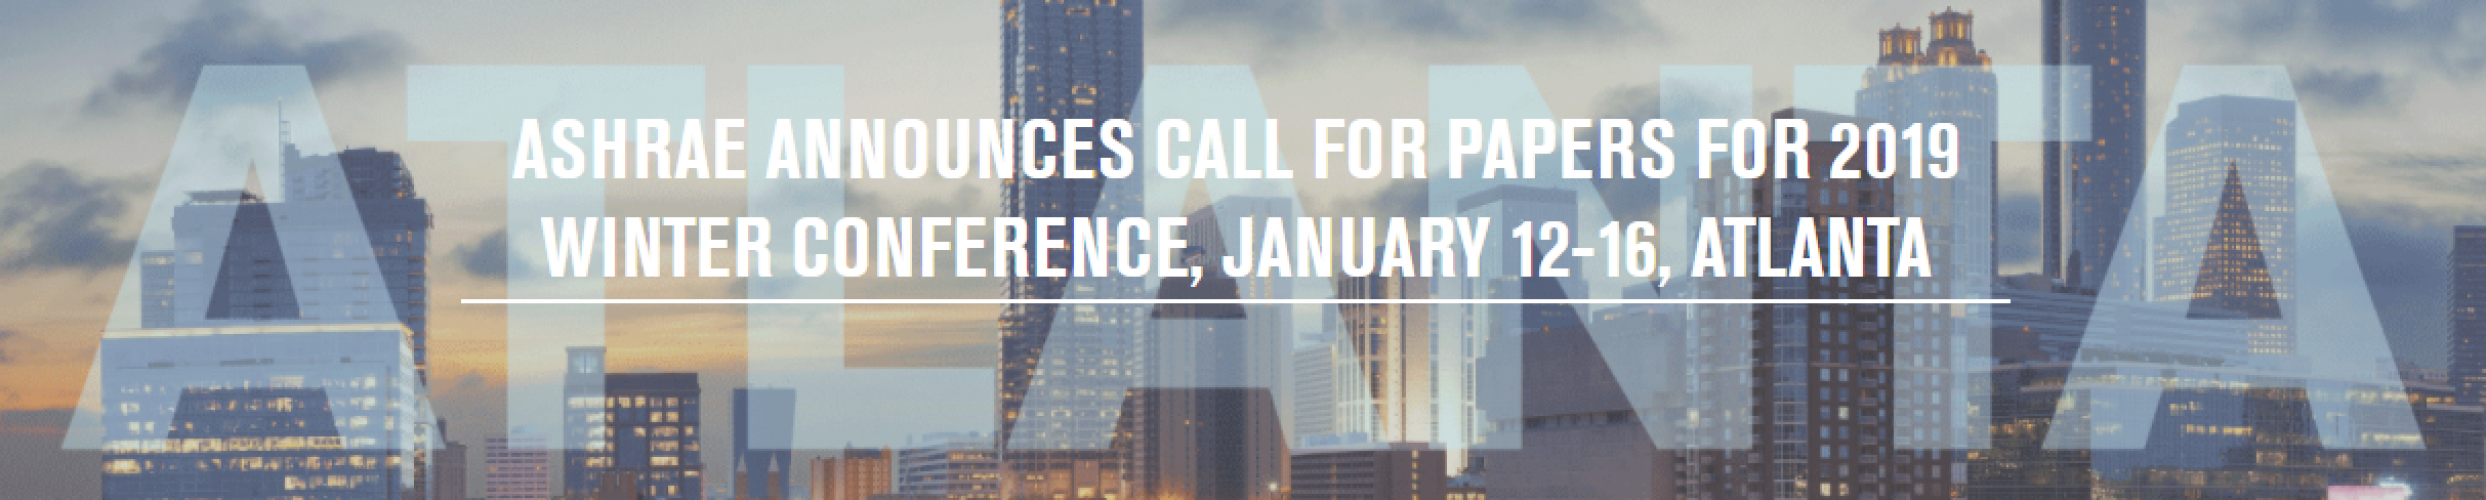 ashrae-announces-call-for-papers-for-2019-winter-conference,-january-12-16,-atlanta